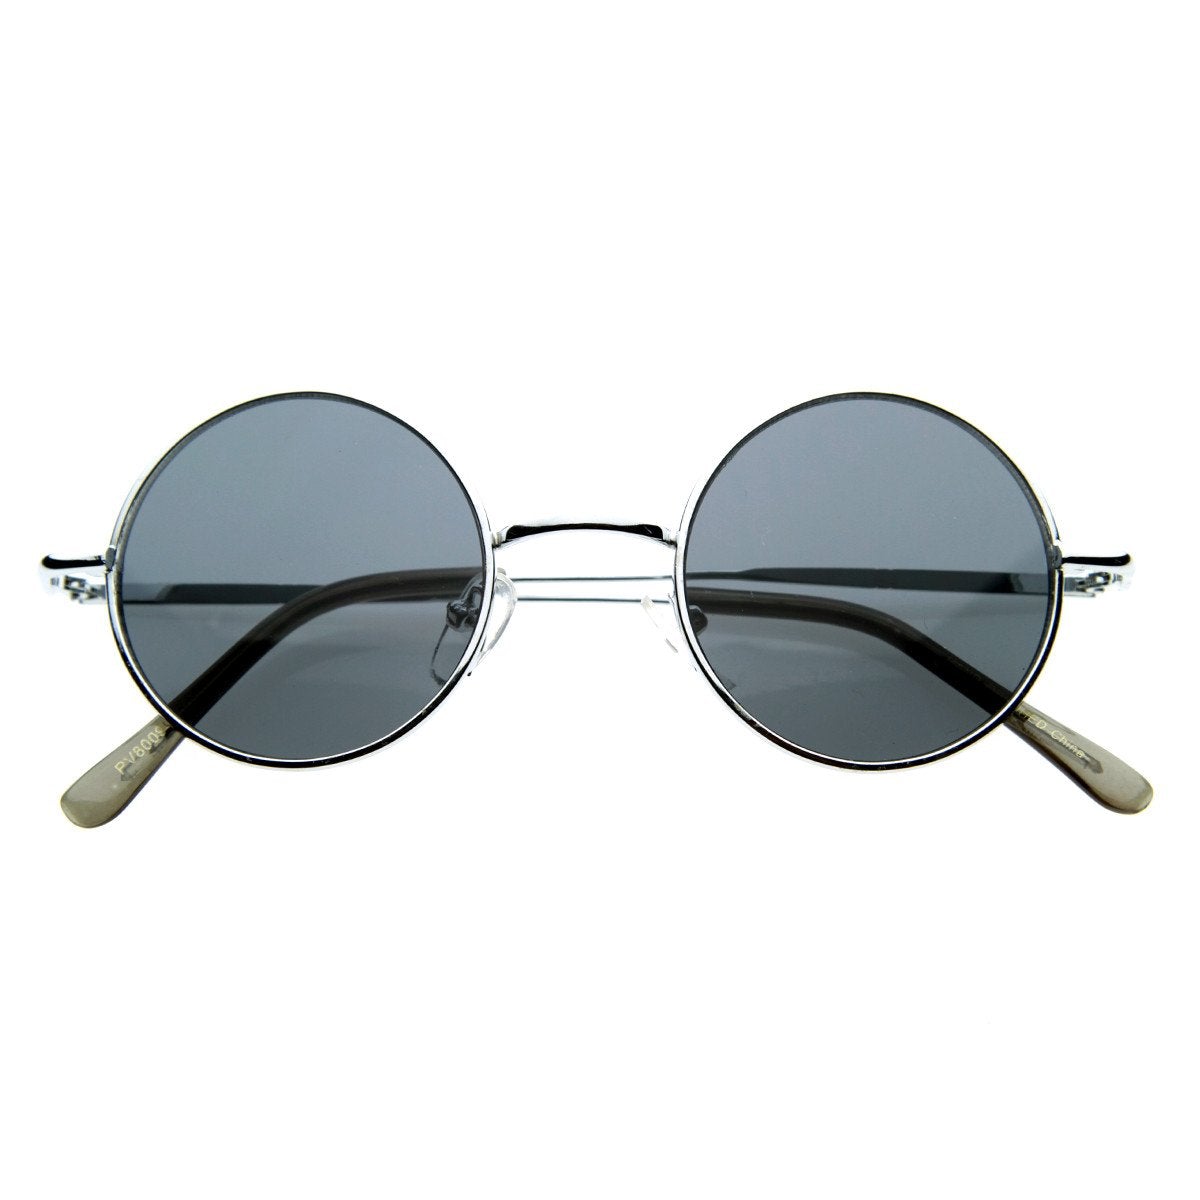 Buy Titanium Clear Round Sunglasses for Men at French Crown